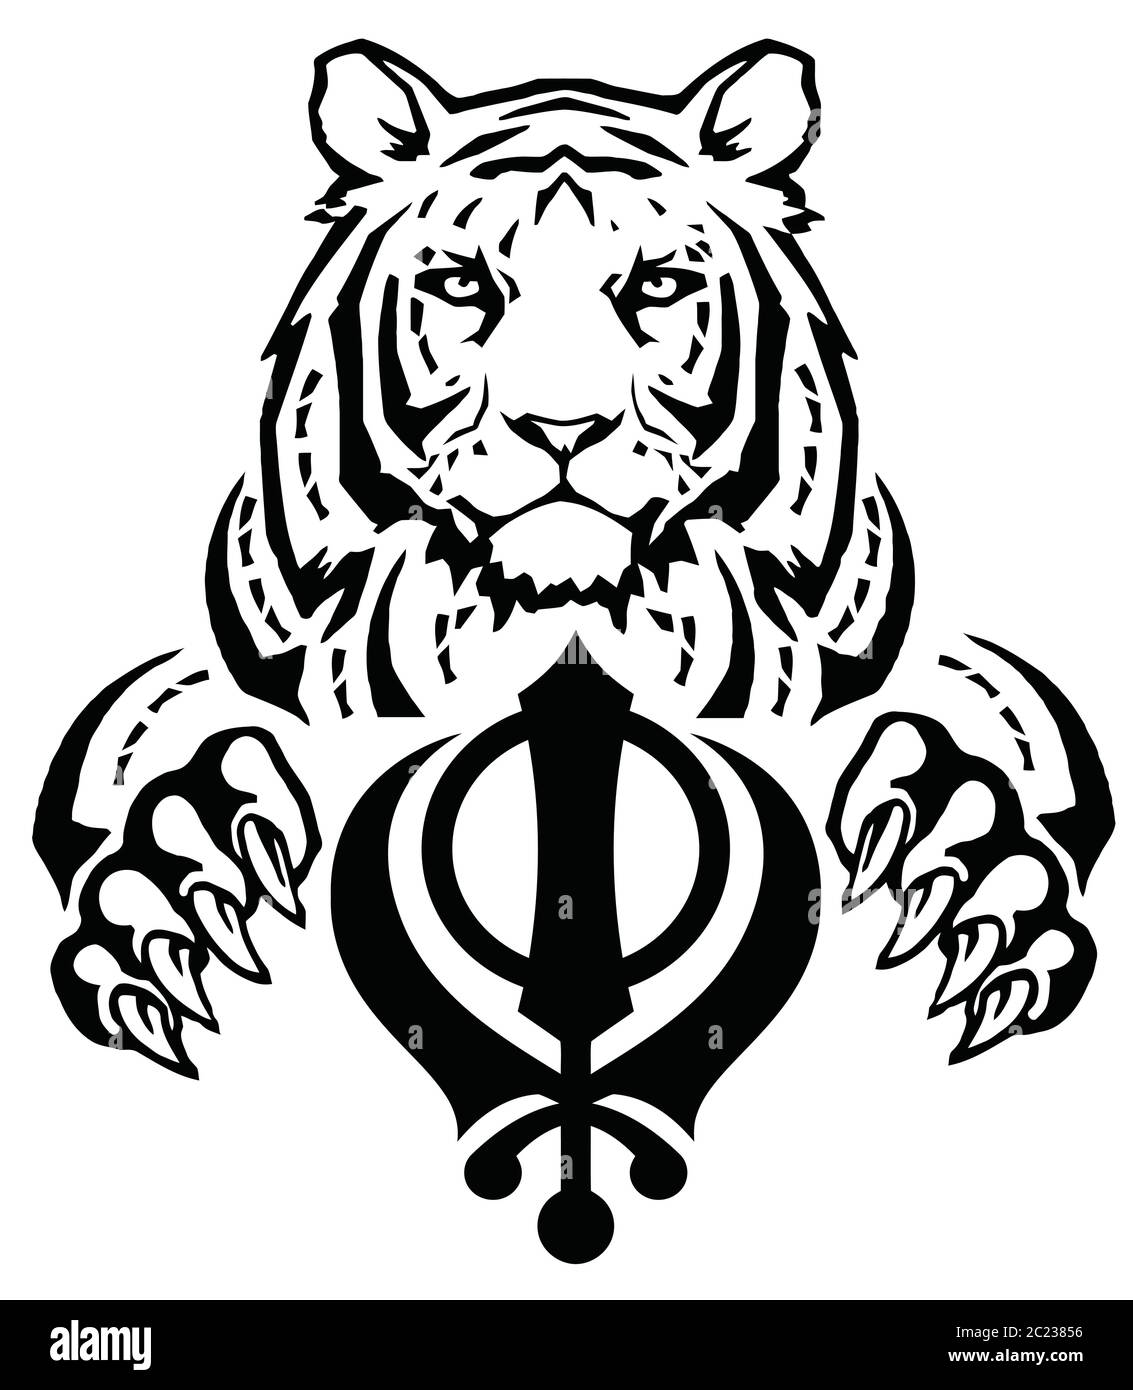 The Tiger and the most significant symbol of Sikhism - Sign of Khanda, drawing for tattoo, on a white background, vector Stock Vector